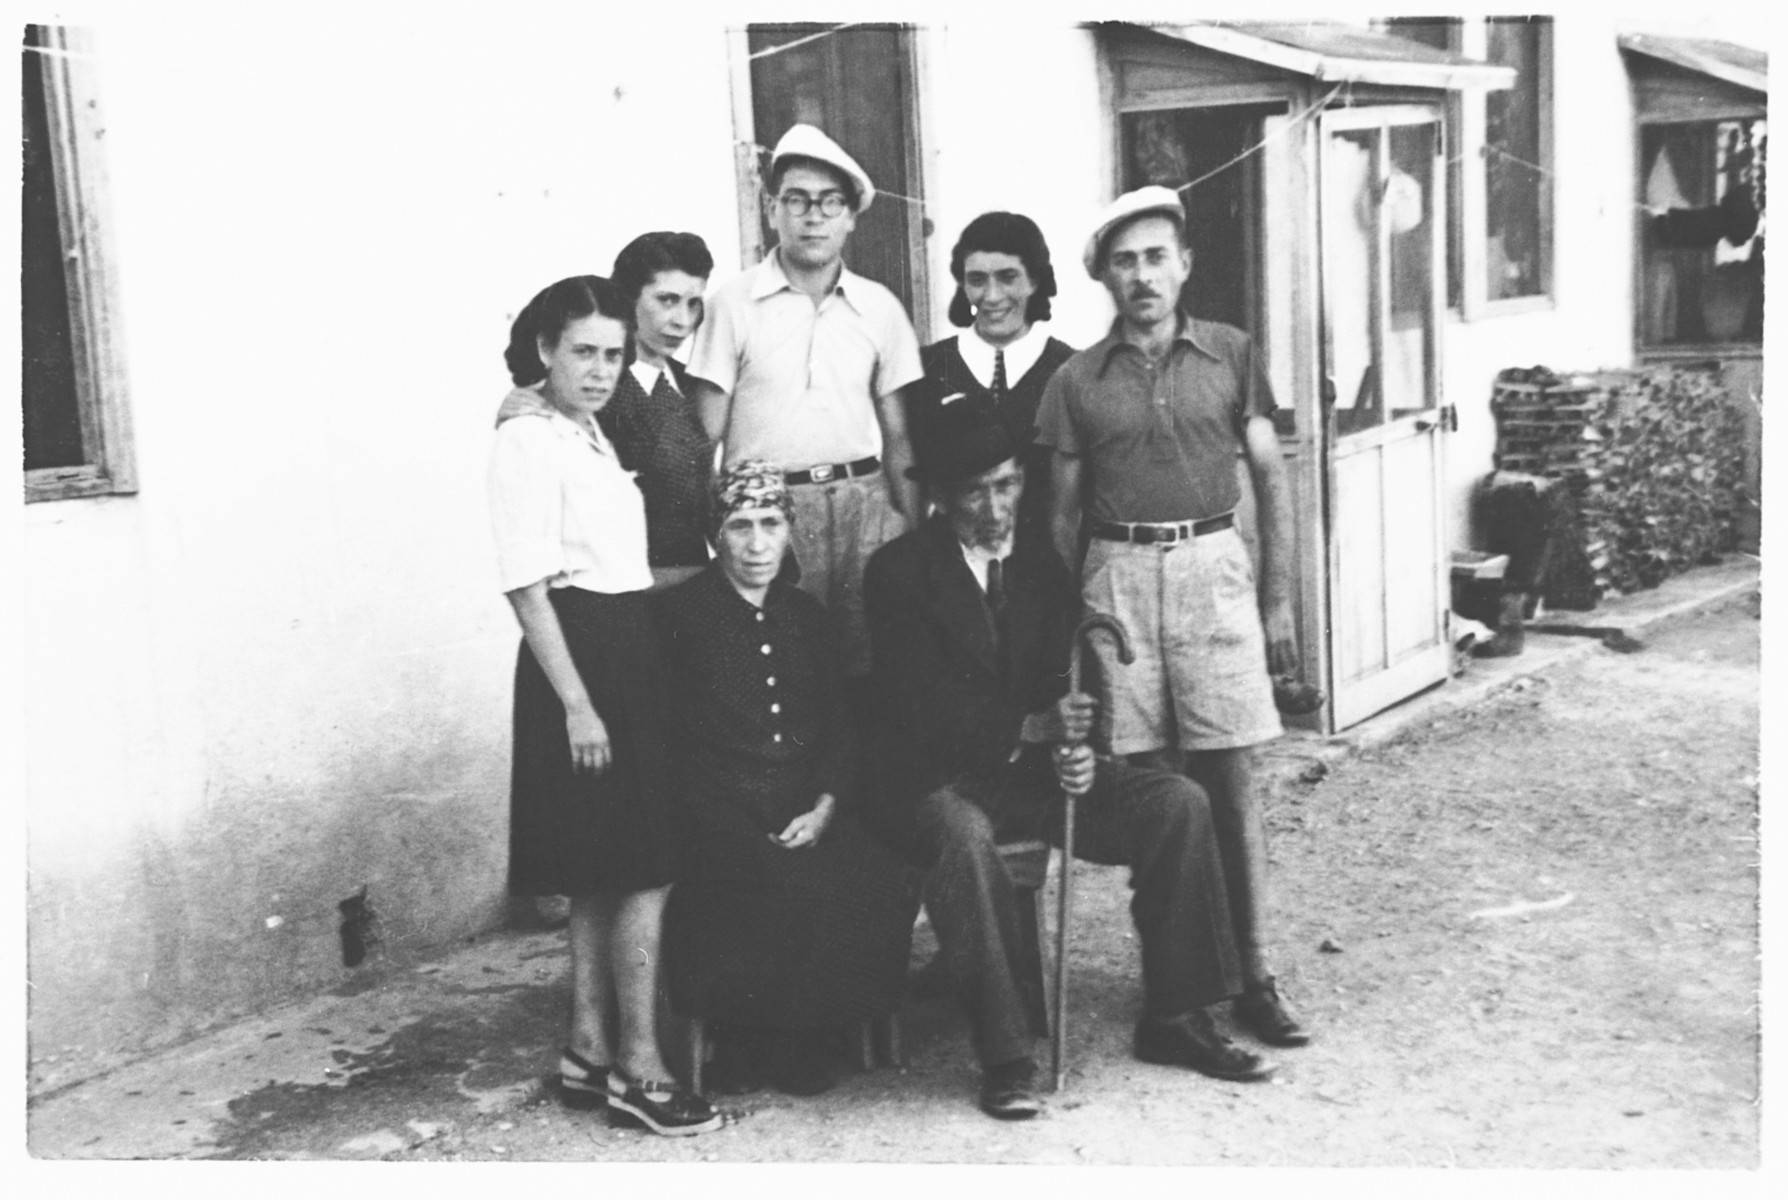 Group portrait of the Ermanno Stern family, internees in the Ferramonti camp.

This photograph was taken during a visit by Rabbi Riccardo Pacifici.